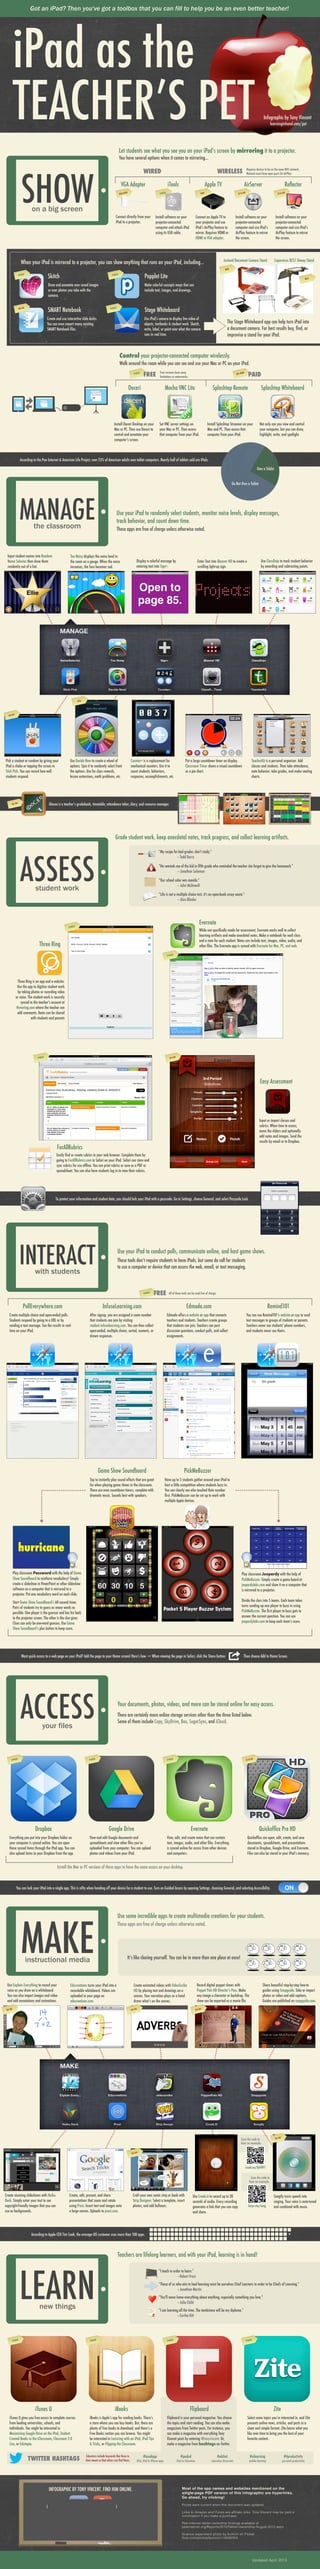 iPad as the
TEACHER’S PET
Got an iPad? Then you've got a toolbox that you can fill to help you be an even better teacher!
SHOWon a big screen
Infographic by Tony Vincent
Let students see what you see you on your iPad’s screen by mirroring it to a projector.
learninginhand.com/pet
You have several options when it comes to mirroring...
VGA Adapter Apple TV AirServer ReﬂectoriTools
Connect directly from your
iPad to a projector.
Install software on your
projector-connected
computer and attach iPad
using its USB cable.
Connect an Apple TV to
your projector and use
iPad’s AirPlay feature to
mirror. Requires HDMI or
HDMI to VGA adapter.
Install software on your
projector-connected
computer and use iPad’s
AirPlay feature to mirror
the screen.
Install software on your
projector-connected
computer and use iPad’s
AirPlay feature to mirror
the screen.
$30-$50
FREE $99 $14.99
$12.99
WIRED WIRELESS Requires devices to be on the same WiFi network.
Network must have open ports for AirPlay.
Control your projector-connected computer wirelessly.
Walk around the room while you can see and use your Mac or PC on your iPad.
Doceri Mocha VNC Lite Splashtop Remote Splashtop Whiteboard
FREE
FREE
Set VNC server settings on
your Mac or PC. Then access
that computer from your iPad.
Not only can you view and control
your computer, but you can draw,
highlight, write, and spotlight.
Install Splashtop Streamer on your
Mac and PC. Then access that
computer from your iPad.
Install Doceri Desktop on your
Mac or PC. Then use Doceri to
control and annotate your
computer’s screen.
Free versions have some
limitations or watermarks.
$3–$20
PAID
When your iPad is mirrored to a projector, you can show anything that runs on your iPad, including...
SMART Notebook
Skitch Popplet Lite
Stage Whiteboard
Draw and annotate over saved images
or over photos you take with the
camera.
Create and use interactive slide decks.
You can even import many existing
SMART Notebook ﬁles.
Make colorful concepts maps that can
include text, images, and drawings.
Use iPad’s camera to display live video of
objects, textbooks & student work. Sketch,
write, label, or point over what the camera
sees in real time.
FREE
FREE
FREE
$6.99
The Stage Whiteboard app can help turn iPad into
a document camera. For best results buy, ﬁnd, or
improvise a stand for your iPad.
Justand Document Camera Stand Copernicus DCS1 Dewey Stand
$64
MANAGEthe classroom
According to the Pew Internet & American Life Project, over 25% of American adults own tablet computers. Nearly half of tablets sold are iPads.
Own a Tablet
Do Not Own a Tablet
Use your iPad to randomly select students, monitor noise levels, display messages,
track behavior, and count down time.
Input student names into Random
Name Selector then draw them
randomly out of a hat.
Too Noisy displays the noise level in
the room on a gauge. When the noise
increases, the face becomes sad.
Display a colorful message by
entering text into Sign+.
Enter Text into iBanner HD to create a
scrolling light-up sign.
Use ClassDojo to track student behavior
by awarding and subtracting points.
These apps are free of charge unless otherwise noted.
Pick a student at random by giving your
iPad a shake or tapping the screen in
Stick Pick. You can record how well
students respond.
Use Decide Now to create a wheel of
options. Spin it to randomly select from
the options. Use for class rewards,
lesson extensions, math problems, etc.
Counter+ is a replacement for
mechanical counters. Use it to
count students, behaviors,
responses, accomplishments, etc.
Put a large countdown timer on display.
Classroom Timer shows a visual countdown
as a pie chart.
TeacherKit is a personal organizer. Add
classes and students. Then take attendance,
note behavior, take grades, and make seating
charts.
$2.99
99¢
iDoceo is a teacher’s gradebook, timetable, attendance taker, diary, and resource manager.
ASSESSstudent work
Grade student work, keep anecdotal notes, track progress, and collect learning artifacts.
“My recipe for bad grades: don't study.”
	 	 -- Todd Barry
$5.99
“He reminds me of the kid in ﬁfth grade who reminded the teacher she forgot to give the homework.”
– Jonathan Solomon
“Our school color was manila.”
– John McDowell
“Life is not a multiple choice test, it's an open-book essay exam.”
– Alan Blinder
Evernote
While not speciﬁcally made for assessment, Evernote works well to collect
learning artifacts and make anecdotal notes. Make a notebook for each class
and a note for each student. Notes can include text, images, video, audio, and
other ﬁles. The Evernote app is synced with Evernote for Mac, PC, and web.
Three Ring is an app and a website.
Use the app to digitize student work
by taking photos or recording video
or voice. The student work is securely
synced to the teacher’s account at
threering.com where the teacher can
add comments. Items can be shared
with students and parents
Three Ring
Input or import classes and
rubrics. When time to assess,
move the sliders and optionally
add notes and images. Send the
results by email or to Dropbox.
Easy Assessment
$1.99
Easily ﬁnd or create rubrics in your web browser. Complete them by
going to ForAllRubrics.com in Safari on your iPad. Safari can store and
sync rubrics for use ofﬂine. You can print rubrics or save as a PDF or
spreadsheet. You can also have students log in to view their rubrics.
ForAllRubrics
FREE
FREE
FREE
To protect your information and student data, you should lock your iPad with a passcode. Go to Settings, choose General, and select Passcode Lock.
INTERACTwith students
Use your iPad to conduct polls, communicate online, and host game shows.
These tools don’t require students to have iPads, but some do call for students
to use a computer or device that can access the web, email, or text messaging.
PollEverywhere.com InfuseLearning.com Edmodo.com
PickMeBuzzer
Remind101
You can use Remind101’s website or app to send
text messages to groups of students or parents.
Teachers never see students' phone numbers,
and students never see theirs.
FREE
FREE All of these tools can be used free of charge.
Game Show Soundboard
Edmodo offers a website or app that connects
teachers and students. Teachers create groups
that students can join. Teachers can post
discussion questions, conduct polls, and collect
assignments.
After signup, you are assigned a room number
that students can join by visiting
student.infuselearning.com. You can then collect
open-ended, multiple choice, sorted, numeric, or
drawn responses.
Create multiple choice and open-ended polls.
Students respond by going to a URL or by
sending a text message. See the results in real-
time on your iPad.
Have up to 5 students gather around your iPad to
host a little competition where students buzz in.
You can clearly see who touched their number
ﬁrst. PickMeBuzzer can be set up to work with
multiple Apple devices.
Tap to instantly play sound effects that are great
for when playing game shows in the classroom.
There are even countdown timers, complete with
dramatic music. Sounds best with speakers.
Play classroom Password with the help of Game
Show Soundboard to reinforce vocabulary! Simply
create a slideshow in PowerPoint or other slideshow
software on a computer that is mirrored to a
projector. Put one vocabulary word on each slide.
Start Game Show Soundboard’s 60 second timer.
Pairs of students try to guess as many words as
possible. One player is the guesser and has his back
to the projector screen. The other is the clue giver.
Clues can only be one-word guesses. Use Game
Show Soundboard’s plus button to keep score.
Play classroom Jeopardy with the help of
PickMeBuzzer. Simply create a game board at
jeopardylabs.com and show it on a computer that
is mirrored to a projector.
Divide the class into 5 teams. Each team takes
turns sending up one player to buzz in using
PickMeBuzzer. The ﬁrst player to buzz gets to
answer the current question. You can use
jeopardylabs.com to keep each team’s score.
Want quick access to a web page on your iPad? Add the page to your Home screen! Here’s how → When viewing the page in Safari, click the Share button.
ACCESSyour files
Your documents, photos, videos, and more can be stored online for easy access.
There are certainly more online storage services other than the three listed below.
Some of them include Copy, SkyDrive, Box, SugarSync, and iCloud.
Everything you put into your Dropbox folder on
your computer is synced online. You can open
those synced items through the iPad app. You can
also upload items to your Dropbox from the app.
Dropbox Google Drive Evernote Quickofﬁce Pro HD
View and edit Google documents and
spreadsheets and view other ﬁles you’ve
uploaded from your computer. You can upload
photos and videos from your iPad.
View, edit, and create notes that can contain
text, images, audio, and other ﬁles. Everything
is synced online for access from other devices
and computers.
Quickofﬁce can open, edit, create, and save
documents, spreadsheets, and presentations
stored in Dropbox, Google Drive, and Evernote.
Files can also be stored in your iPad’s memory.
$19.99FREEFREEFREE
Install the Mac or PC versions of these apps to have the same access on your desktop.
You can lock your iPad into a single app. This is nifty when handing off your device for a student to use. Turn on Guided Access by opening Settings, choosing General, and selecting Accessibility. ON
MAKEinstructional media
Use some incredible apps to create multimedia creations for your students.
Use Explain Everything to record your
voice as you draw on a whiteboard.
You can also import images and video
and add annotations and animations.
Educreations turns your iPad into a
recordable whiteboard. Videos are
uploaded to your page on
educreations.com
Create animated videos with VideoScribe
HD by placing text and drawings on a
canvas. Your narration plays as a hand
draws what’s on the canvas.
Record digital puppet shows with
Puppet Pals HD Director’s Pass. Make
any image a character or backdrop. The
show can be exported as a movie ﬁle.
Share beautiful step-by-step how-to
guides using Snapguide. Take or import
photos or video and add captions.
Guides are published on snapguide.com.
Create stunning slideshows with Haiku
Deck. Simply enter your text to see
copyright-friendly images that you can
use as backgrounds.
Create, edit, present, and share
presentations that zoom and rotate
using Prezi. Insert text and images onto
a large canvas. Uploads to prezi.com.
Use Croak.it to record up to 30
seconds of audio. Every recording
generates a link that you can copy
and share.
It’s like cloning yourself. You can be in more than one place at once!
Craft your own comic strip or book with
Strip Designer. Select a template, insert
photos, and add balloons.
According to Apple CEO Tim Cook, the average iOS customer uses more than 100 apps.
$2.99
These apps are free of charge unless otherwise noted.
$4.99 $2.99
+
$2.99
Scan the code to
hear an example.
croak.eu/XeFHP1
Scan the code to
hear an example.
tonyv.me/song
Songify turns speech into
singing. Your voice is auto-tuned
and combined with music.
$2.99
LEARNnew things
Teachers are lifelong learners, and with your iPad, learning is in hand!
Then choose Add to Home Screen.
“I teach in order to learn.”
	 	 -- Robert Frost
“Those of us who aim to lead learning must be ourselves Chief Learners in order to be Chiefs of Learning.”
	 	 -- Jonathan Martin
“You'll never know everything about anything, especially something you love.”
	 	 -- Julia Child
“I am learning all the time. The tombstone will be my diploma.”
	 	 -- Eartha Kitt
iTunes U gives you free access to complete courses
from leading universities, schools, and
individuals. You might be interested in
Maximizing Google Drive on the iPad, Student
Created Books in the iClassroom, Classroom 2.0
Live, or Edutopia.
iTunes U iBooks Flipboard Zite
iBooks is Apple’s app for reading books. There’s
a store where you can buy books. But, there are
plenty of free books to download, and there’s a
Free Books section you can browse. You might
be interested in Lecturing with an iPad, iPad Tips
& Tricks, or Flipping the Classroom.
Flipboard is your personal magazine. You choose
the topics and start reading. You can also make
magazines from Twitter posts. For instance, you
can make a magazine with everything Tony
Vincent posts by entering @tonyvincent. Or,
make a magazine from hashtags on Twitter.
Select some topics you’re interested in, and Zite
presents online news, articles, and posts in a
clean and simple format. Zite learns what you
like over time to bring you the best of your
favorite content.
TWITTER HASHTAGS
Educators include keywords like these in
their tweets so that others can ﬁnd them:
#iosedapp
iPad, iPod & iPhone apps
#ipaded
iPad in Education
#edchat
education discussion
#mlearning
mobile learning
#4productivity
personal productivity
FREE FREE FREE FREE
learninginhand.com/pet
Most of the app names and websites mentioned on the
single-page PDF version of this infographic are hyperlinks.
Go ahead, try clicking!
Prices were current when this document was updated.
Links to Amazon and iTunes are affiliate links. Tony Vincent may be paid a
commission if you make a purchase.
Pew Internet tablet ownership findings available at
pewinternet.org/Reports/2012/Tablet-Ownership-August-2012.aspx
Science experiment photo by bcmom on Flicker
flickr.com/photos/bcmom/116590353
c b 3a Updated April 2013
pinterest.com/tonyvincent
INFOGRAPHIC BY TONY VINCENT. FIND HIM ONLINE.
facebook.com/learninginhand plustony.com
twitter.com/tonyvincent
$89
 